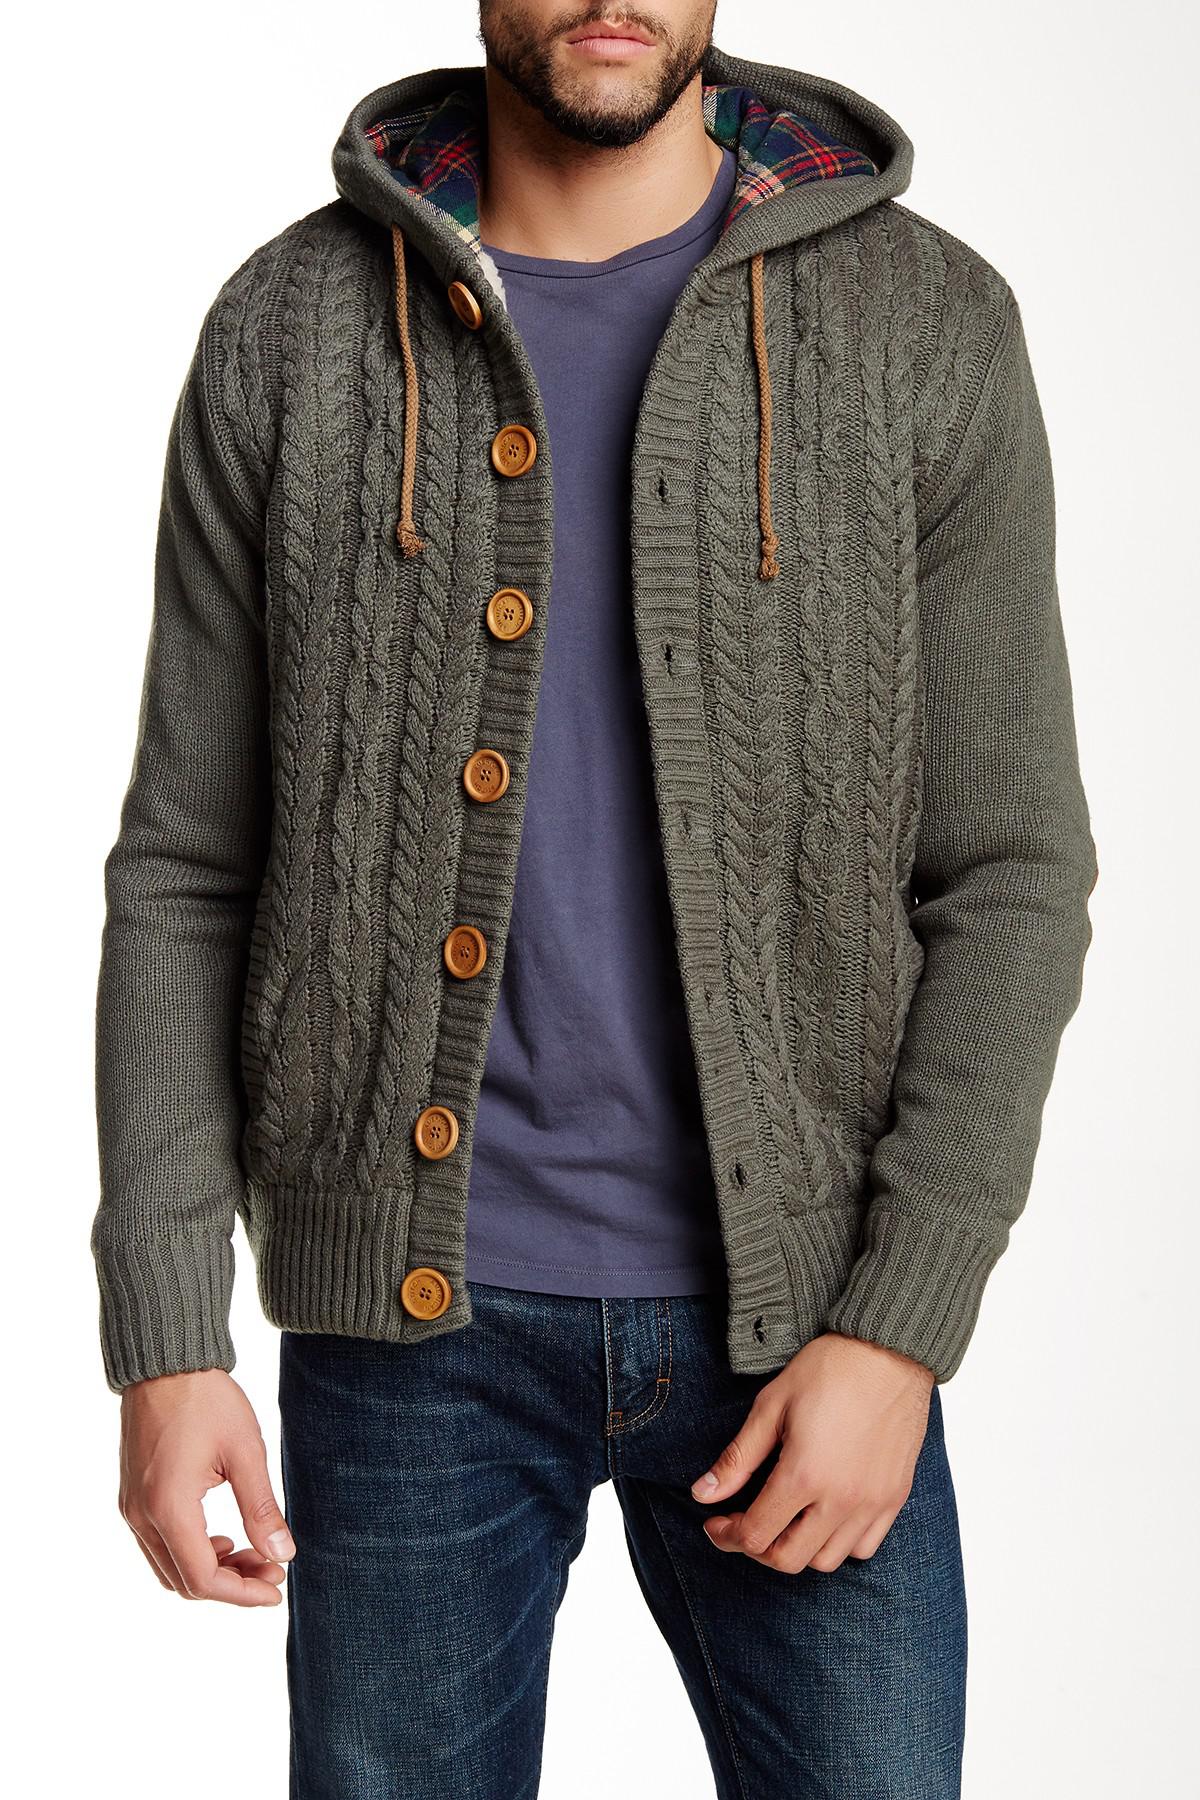 American Stitch Knit Cardigan Hoodie in Green for Men - Lyst